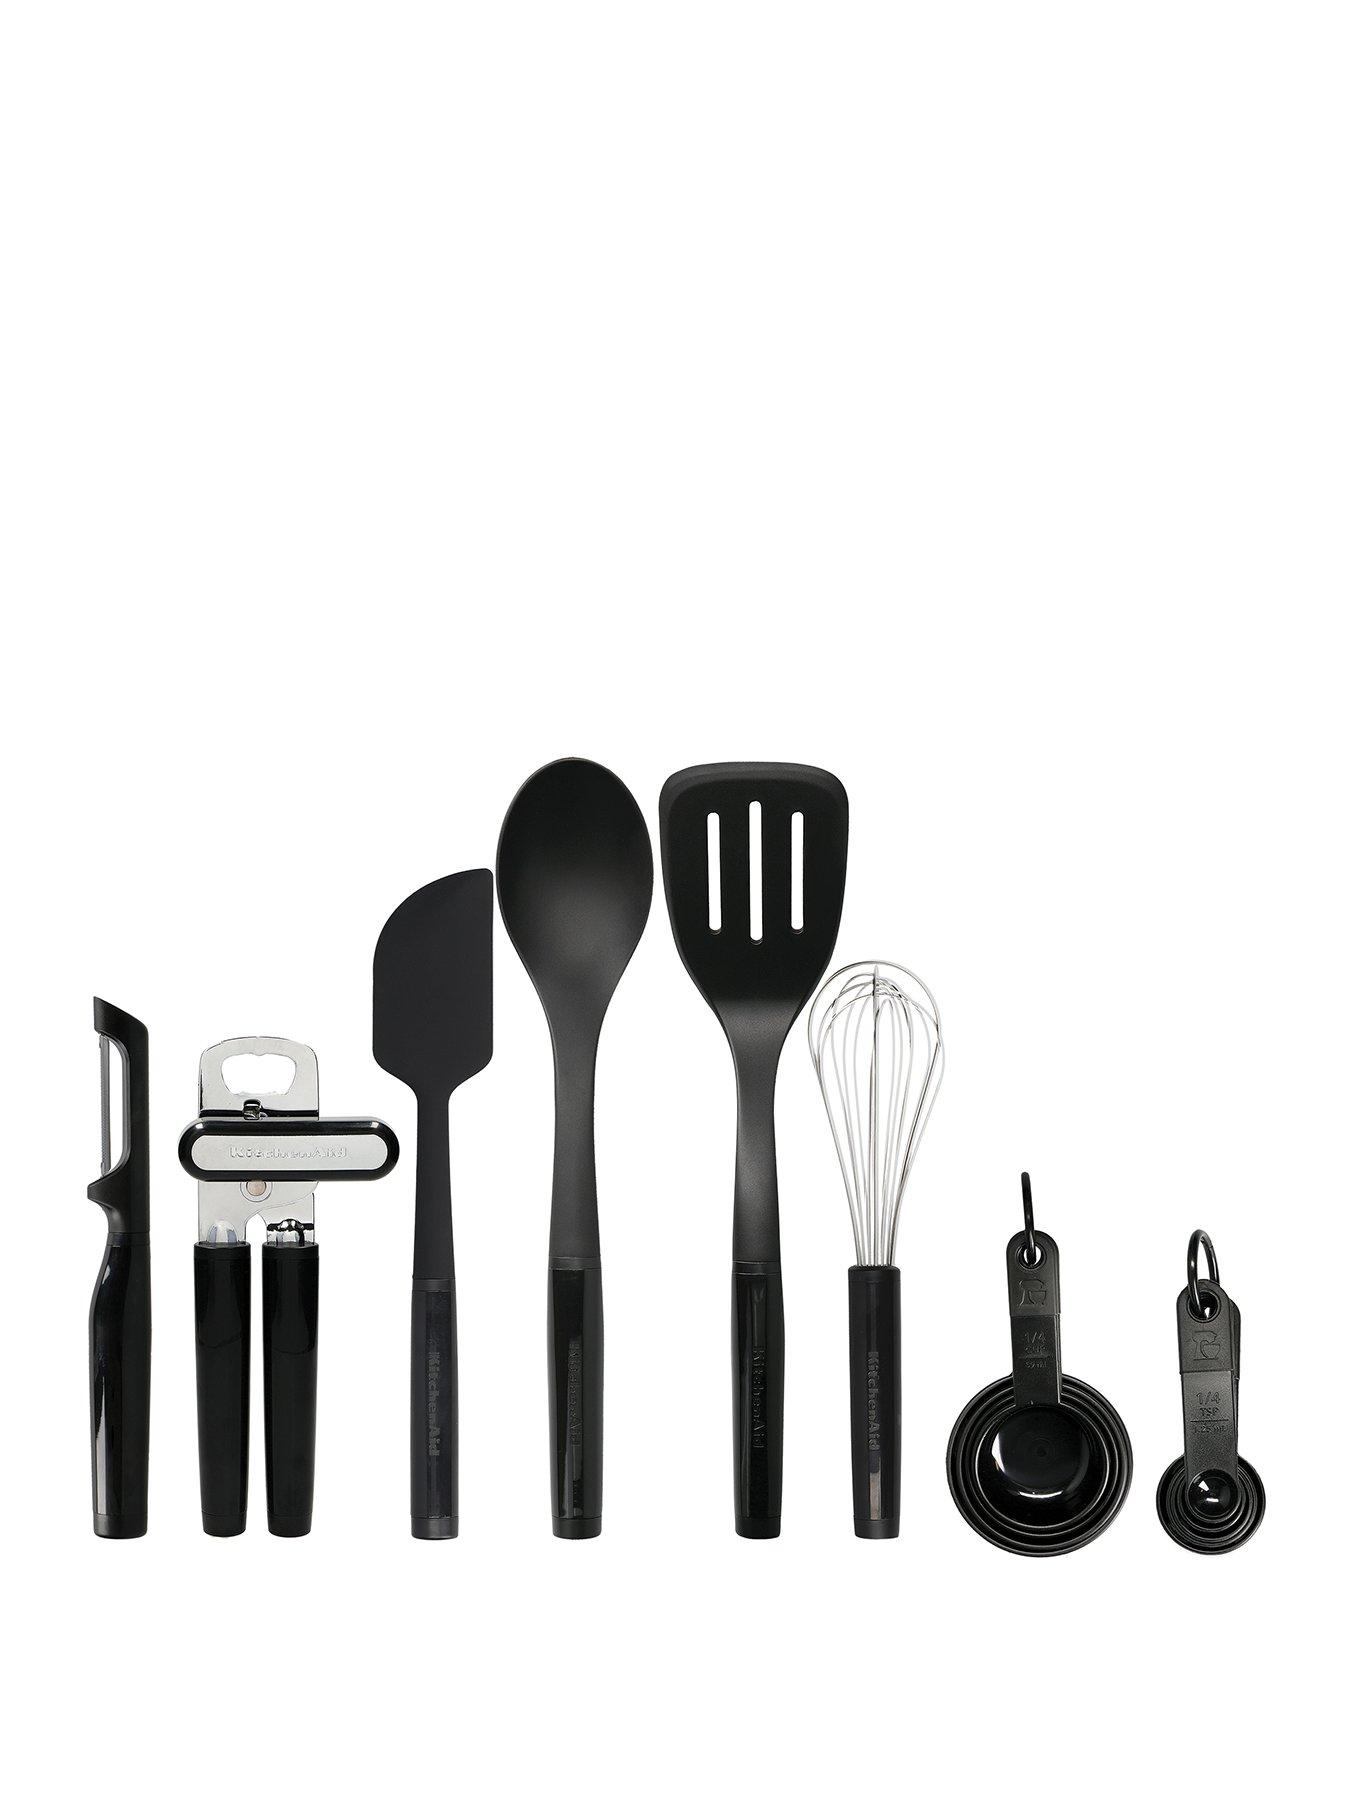 KitchenAid 17-Piece Tool and Gadget Set in the Kitchen Tools department at